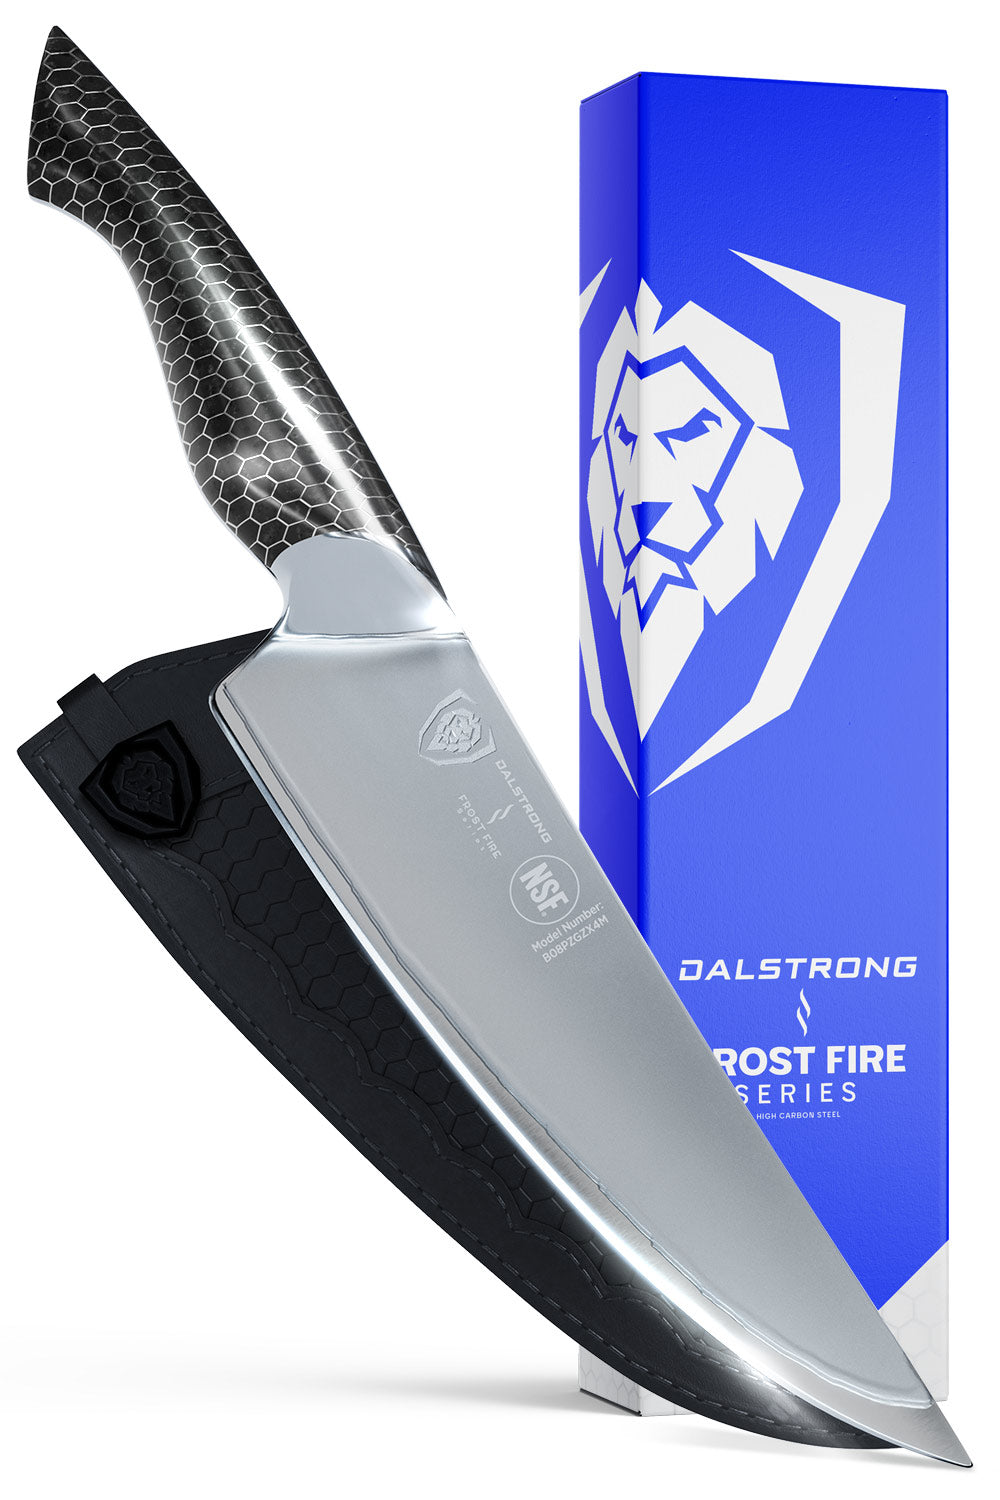 Dalstrong frost fire series 8 inch chef knife with dark ice handle in front of it's premium packaging.